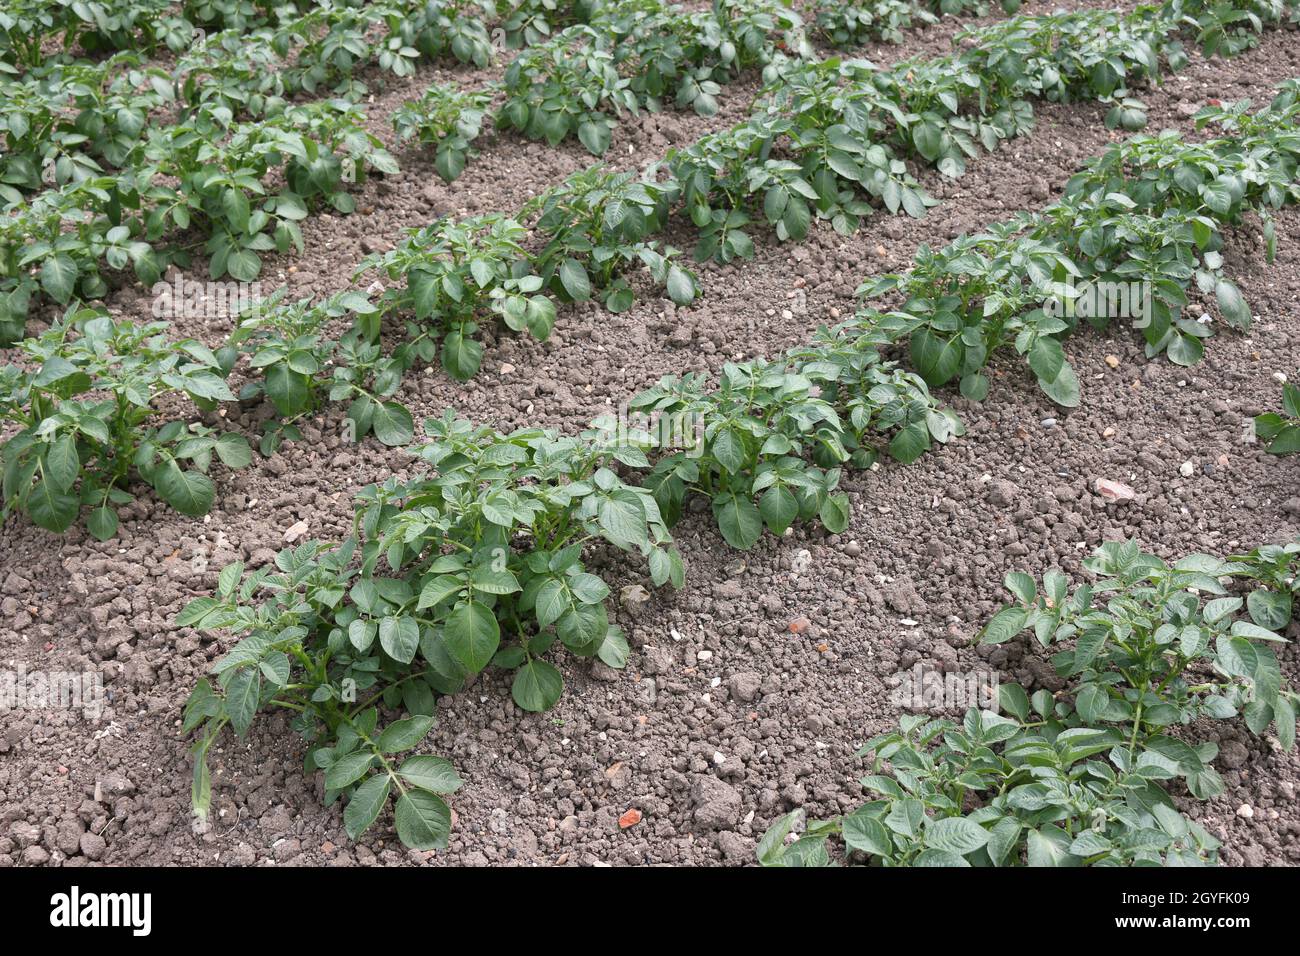 Rows of potatoes, Solanum tuberosum of unknown variety, growing in a vegetable garden with a well cultivated weed free soil as background. Stock Photo